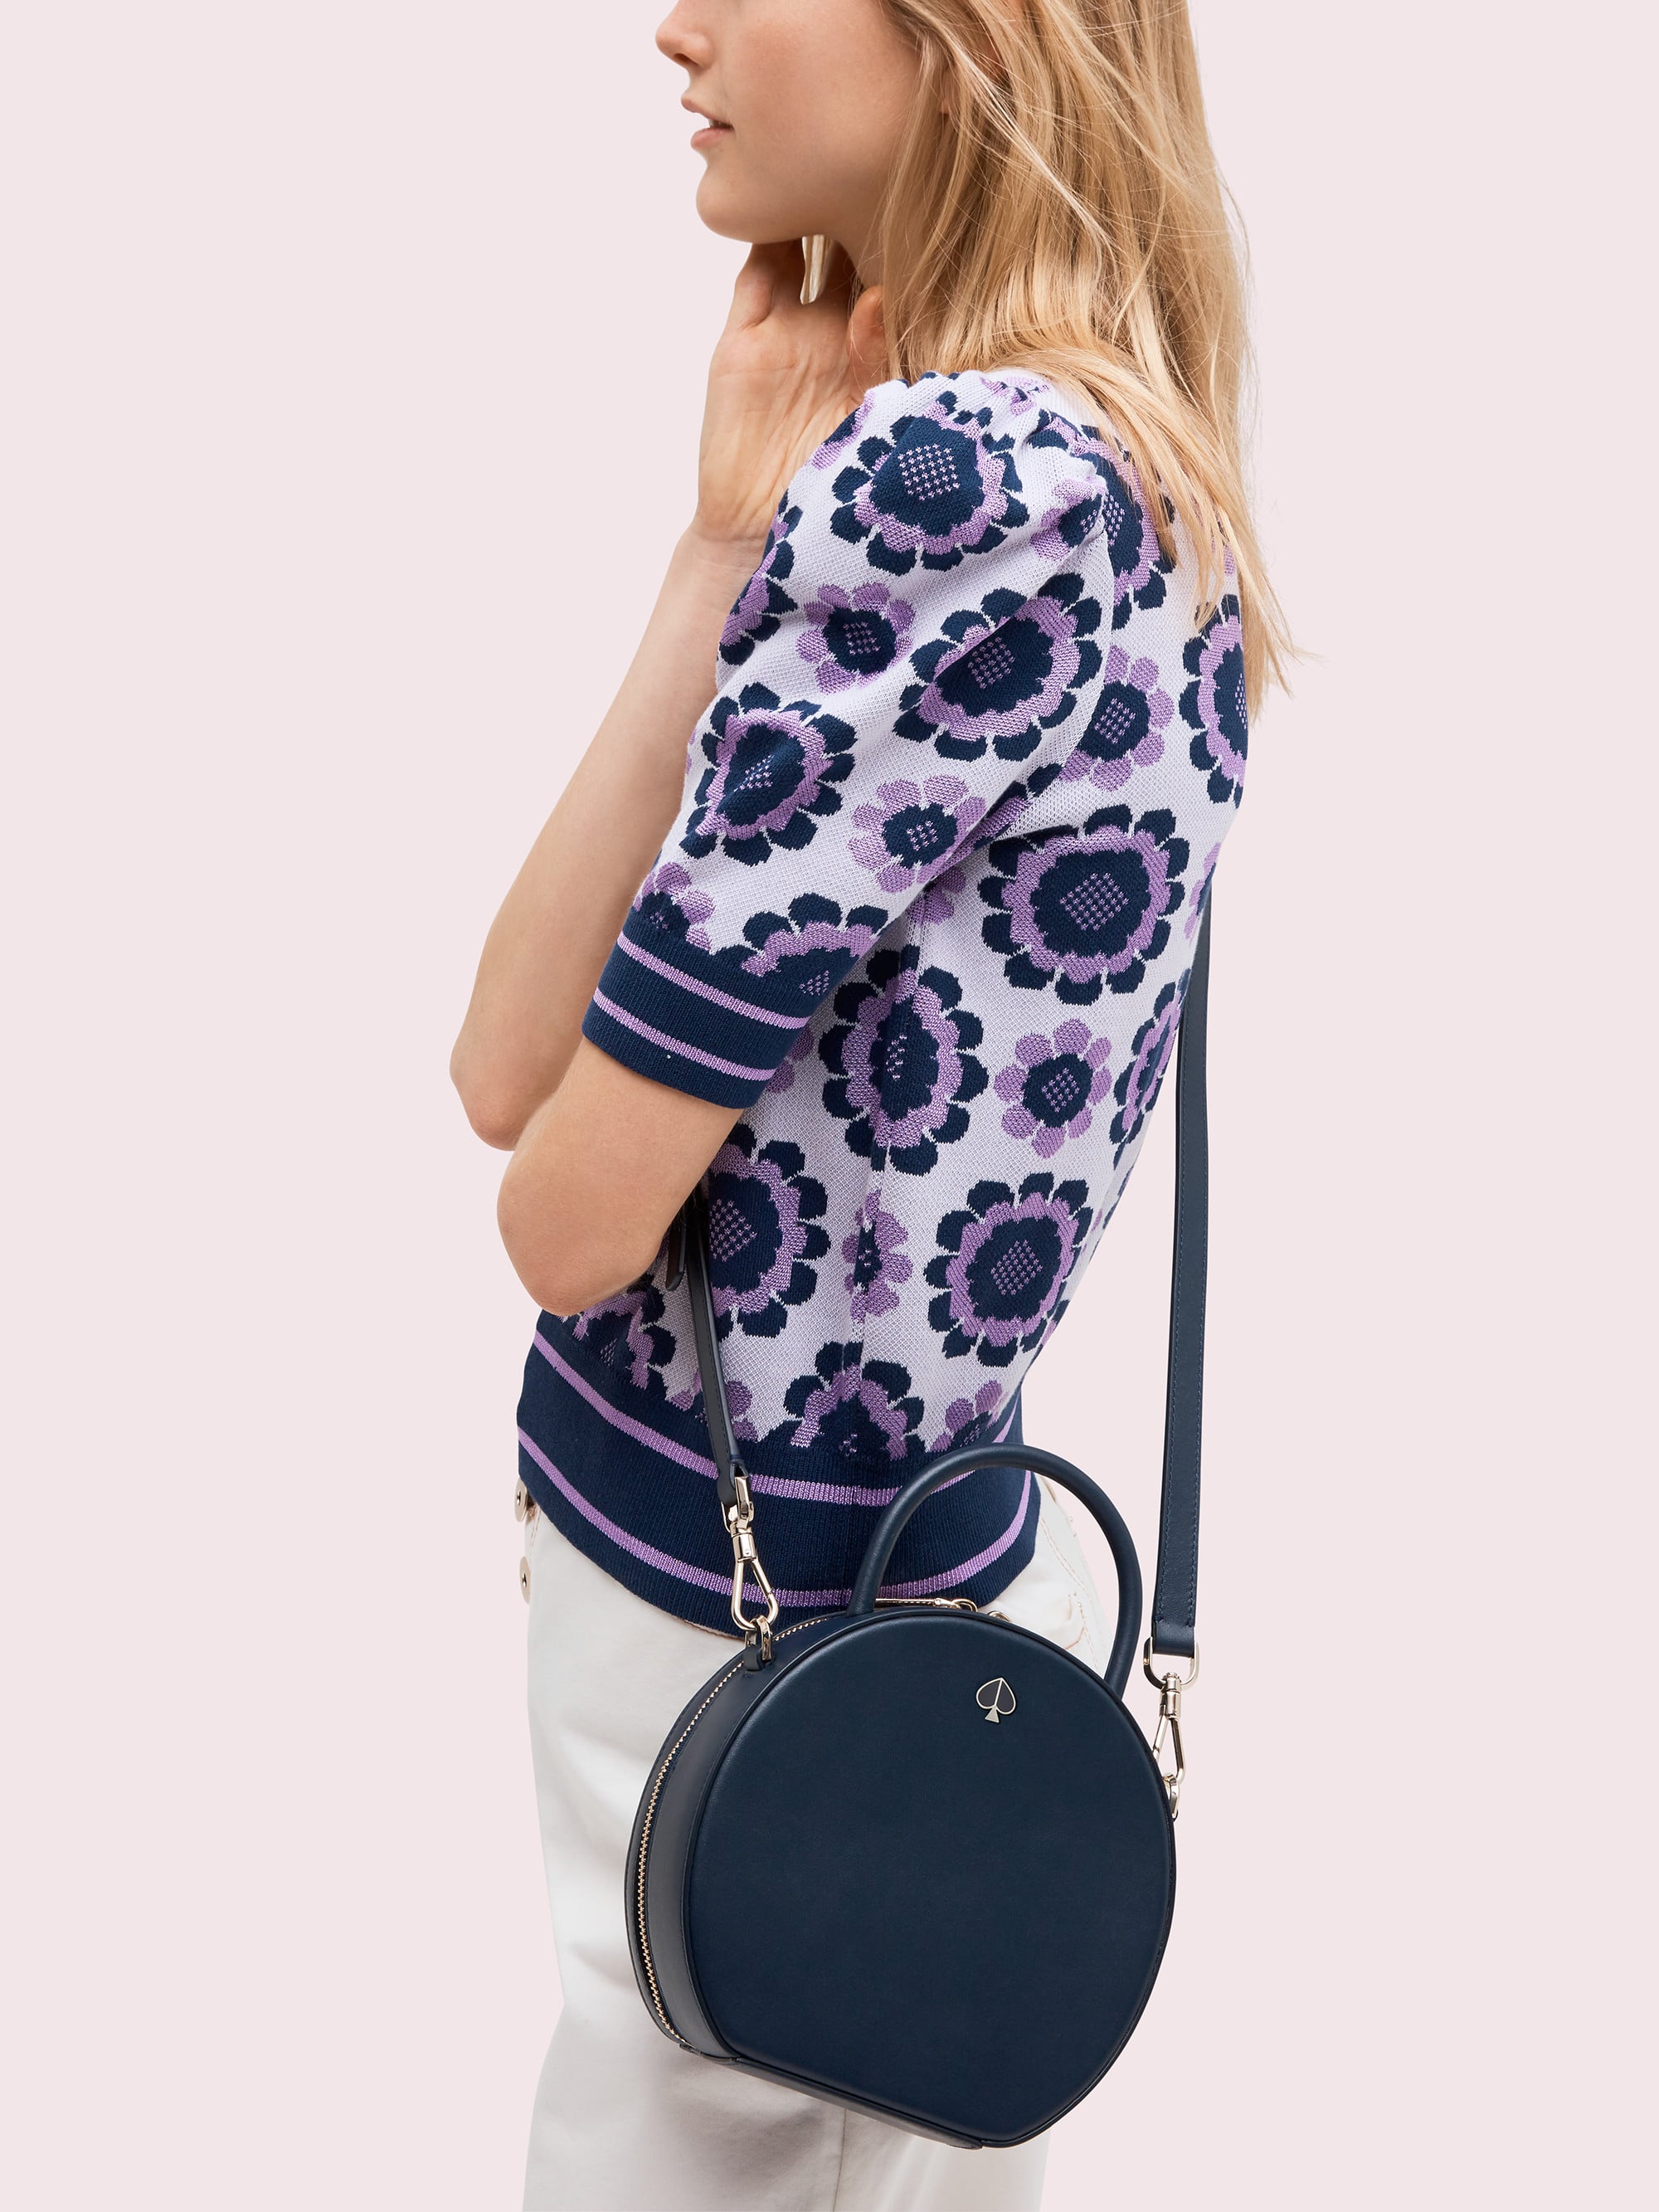 Kate Spade New York Andi Canteen Bag | Keep Your Hands Free This Spring  With These 100 Cute and Functional Crossbody Bags | POPSUGAR Fashion Photo  10